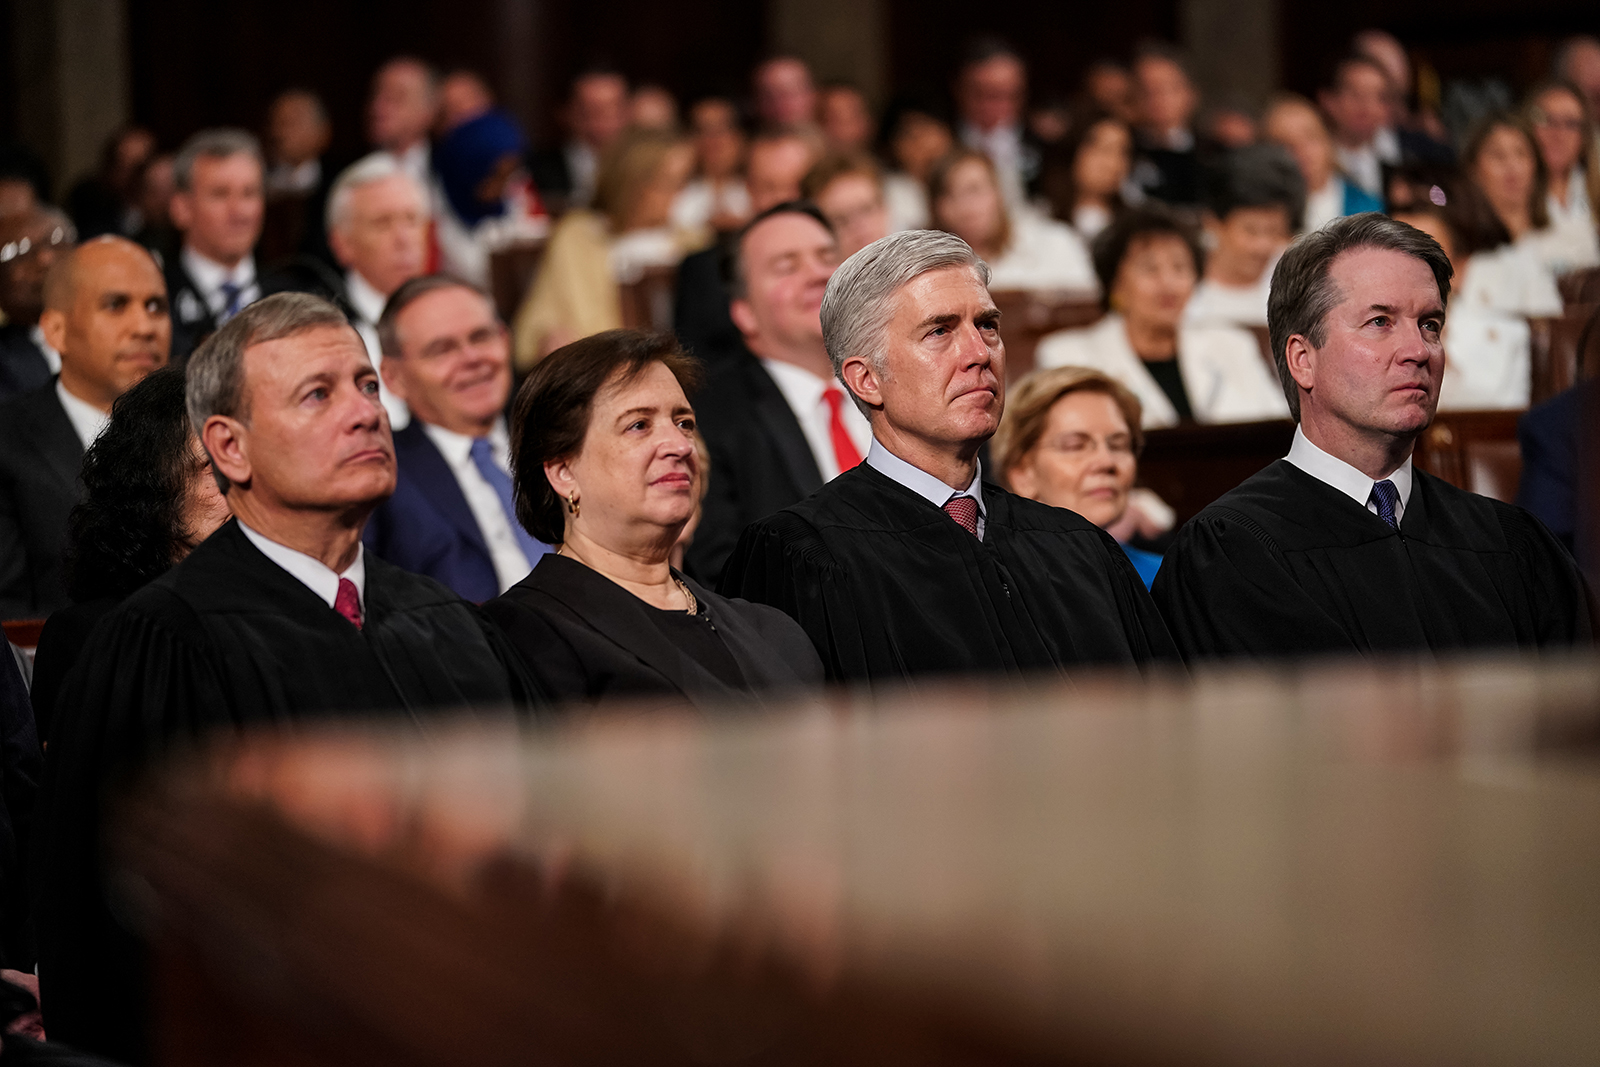 Supreme Court Justices John Roberts, Elena Kagan, Neil Gorsuch and Brett Kavanaugh attend the State of the Union address in the chamber of the U.S. House of Representatives at the US Capitol Building on February 5, 2019 in Washington, DC.